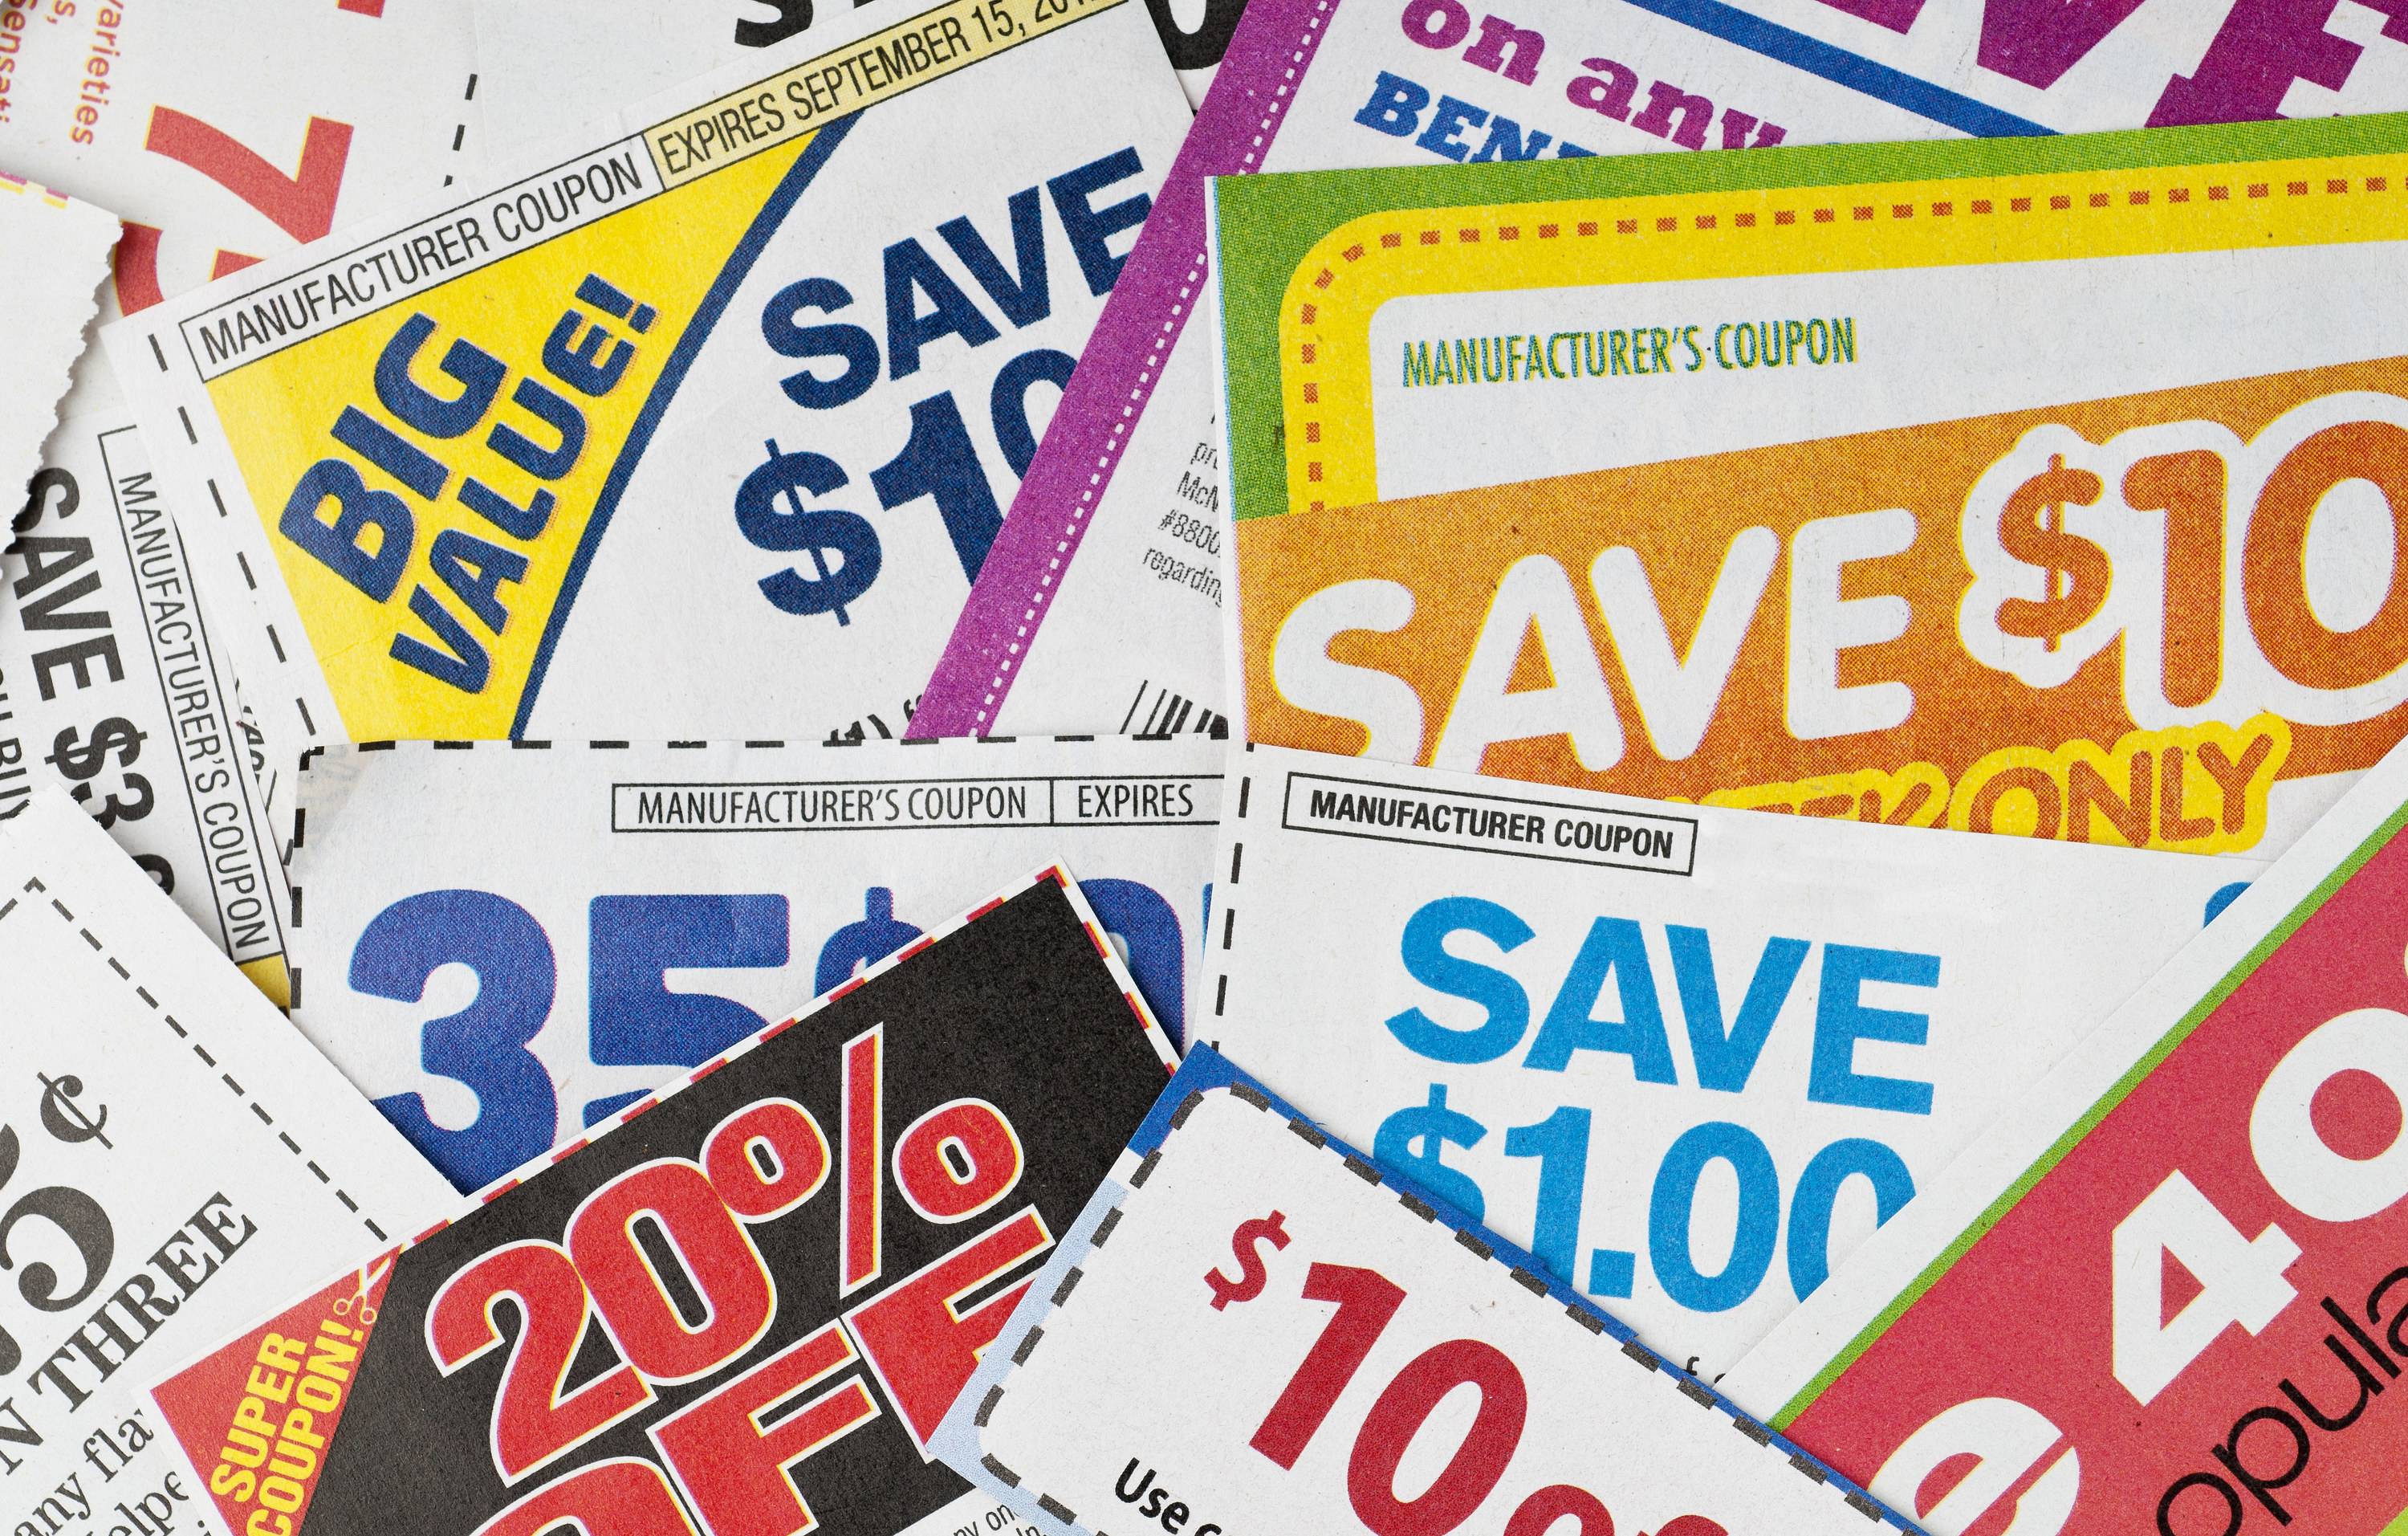 large stack of coupons